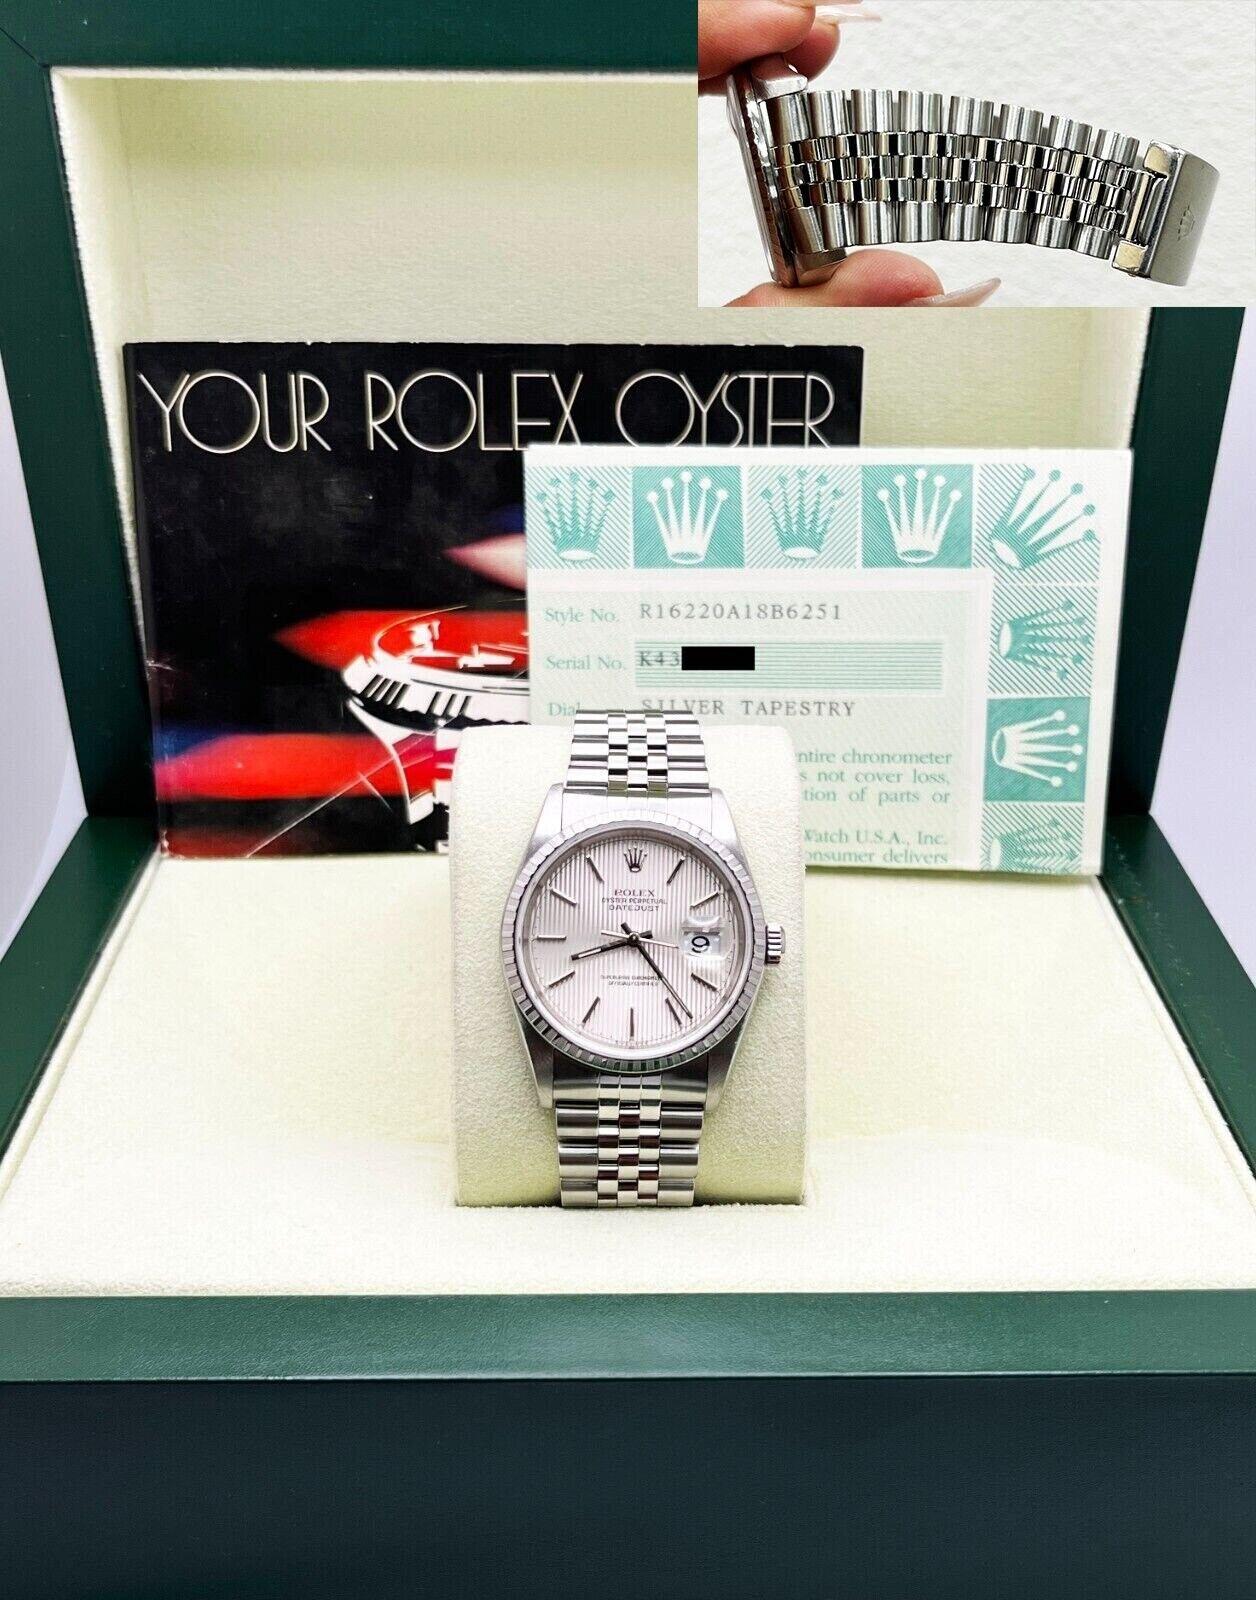 Rolex 16220 Datejust Silver Tapestry Dial Stainless Steel 2004 Box Paper For Sale 1